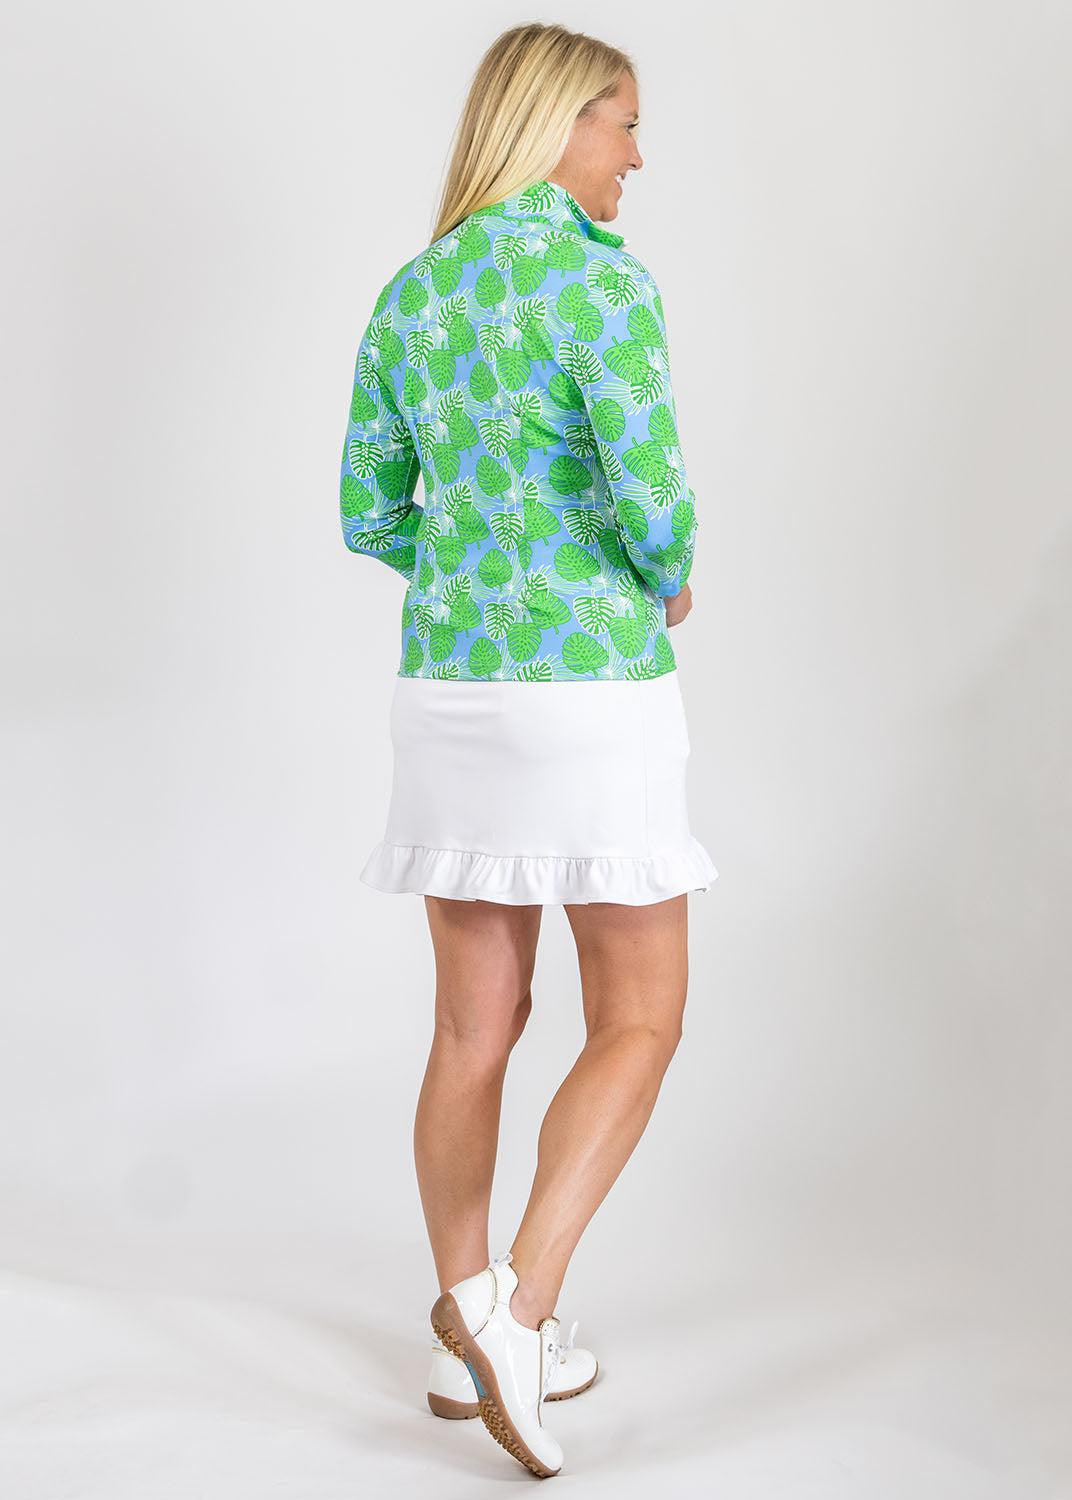 4 Sleeve Top in a Palm Print  2